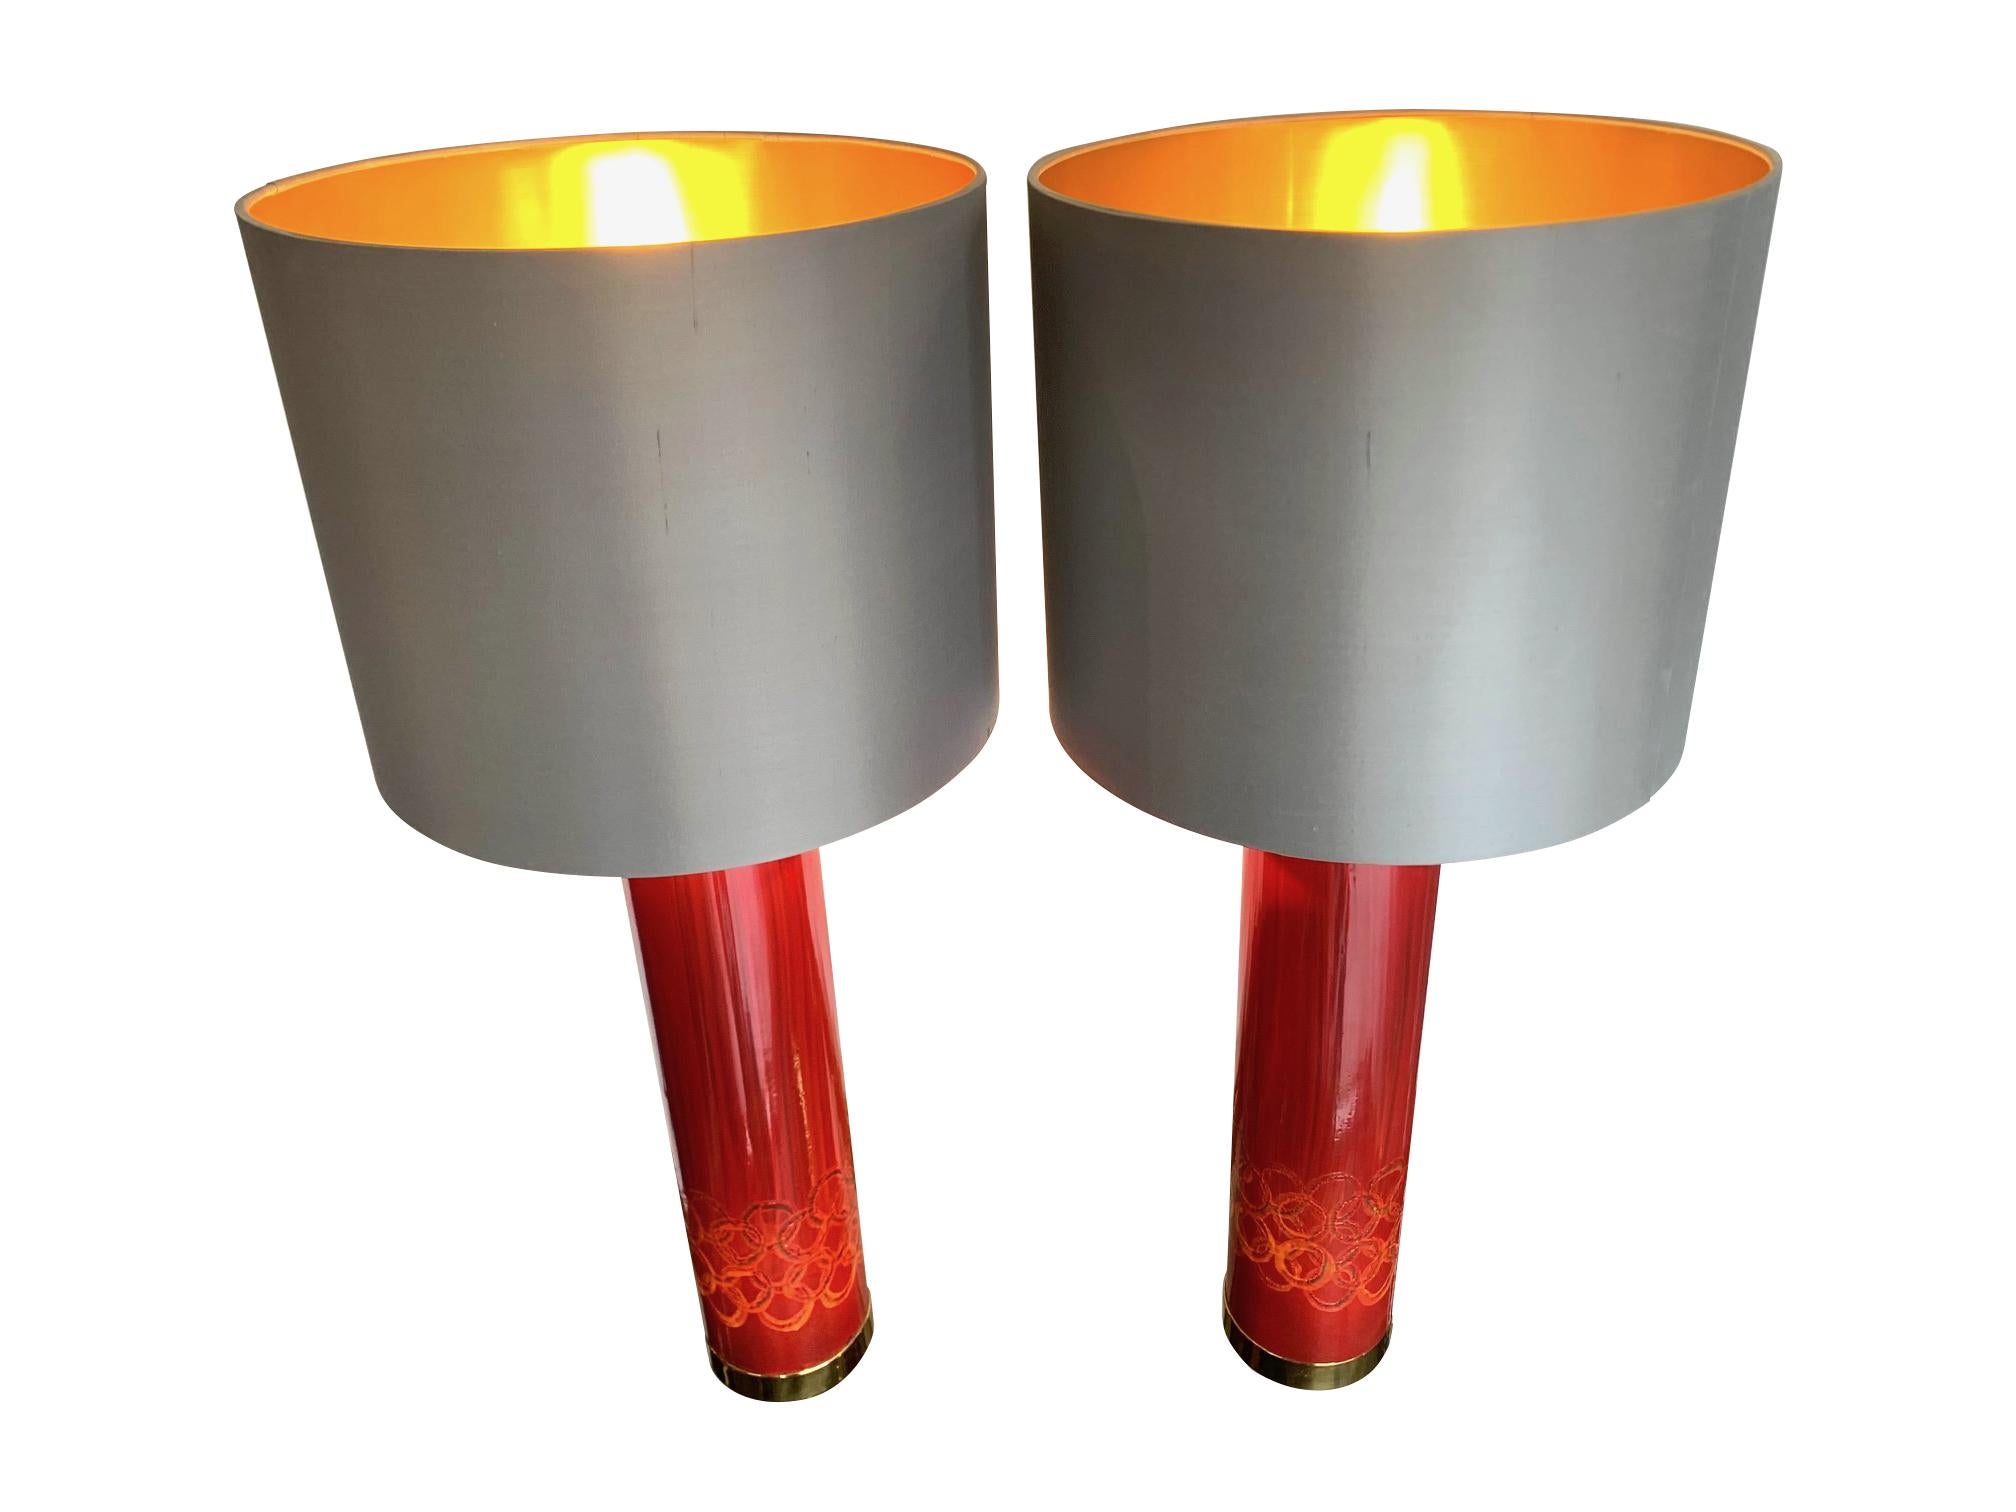 Mid-20th Century Lovely Pair of Swedish Red Ceramic Lamps Brass Fittings and New Bespoke Shades For Sale